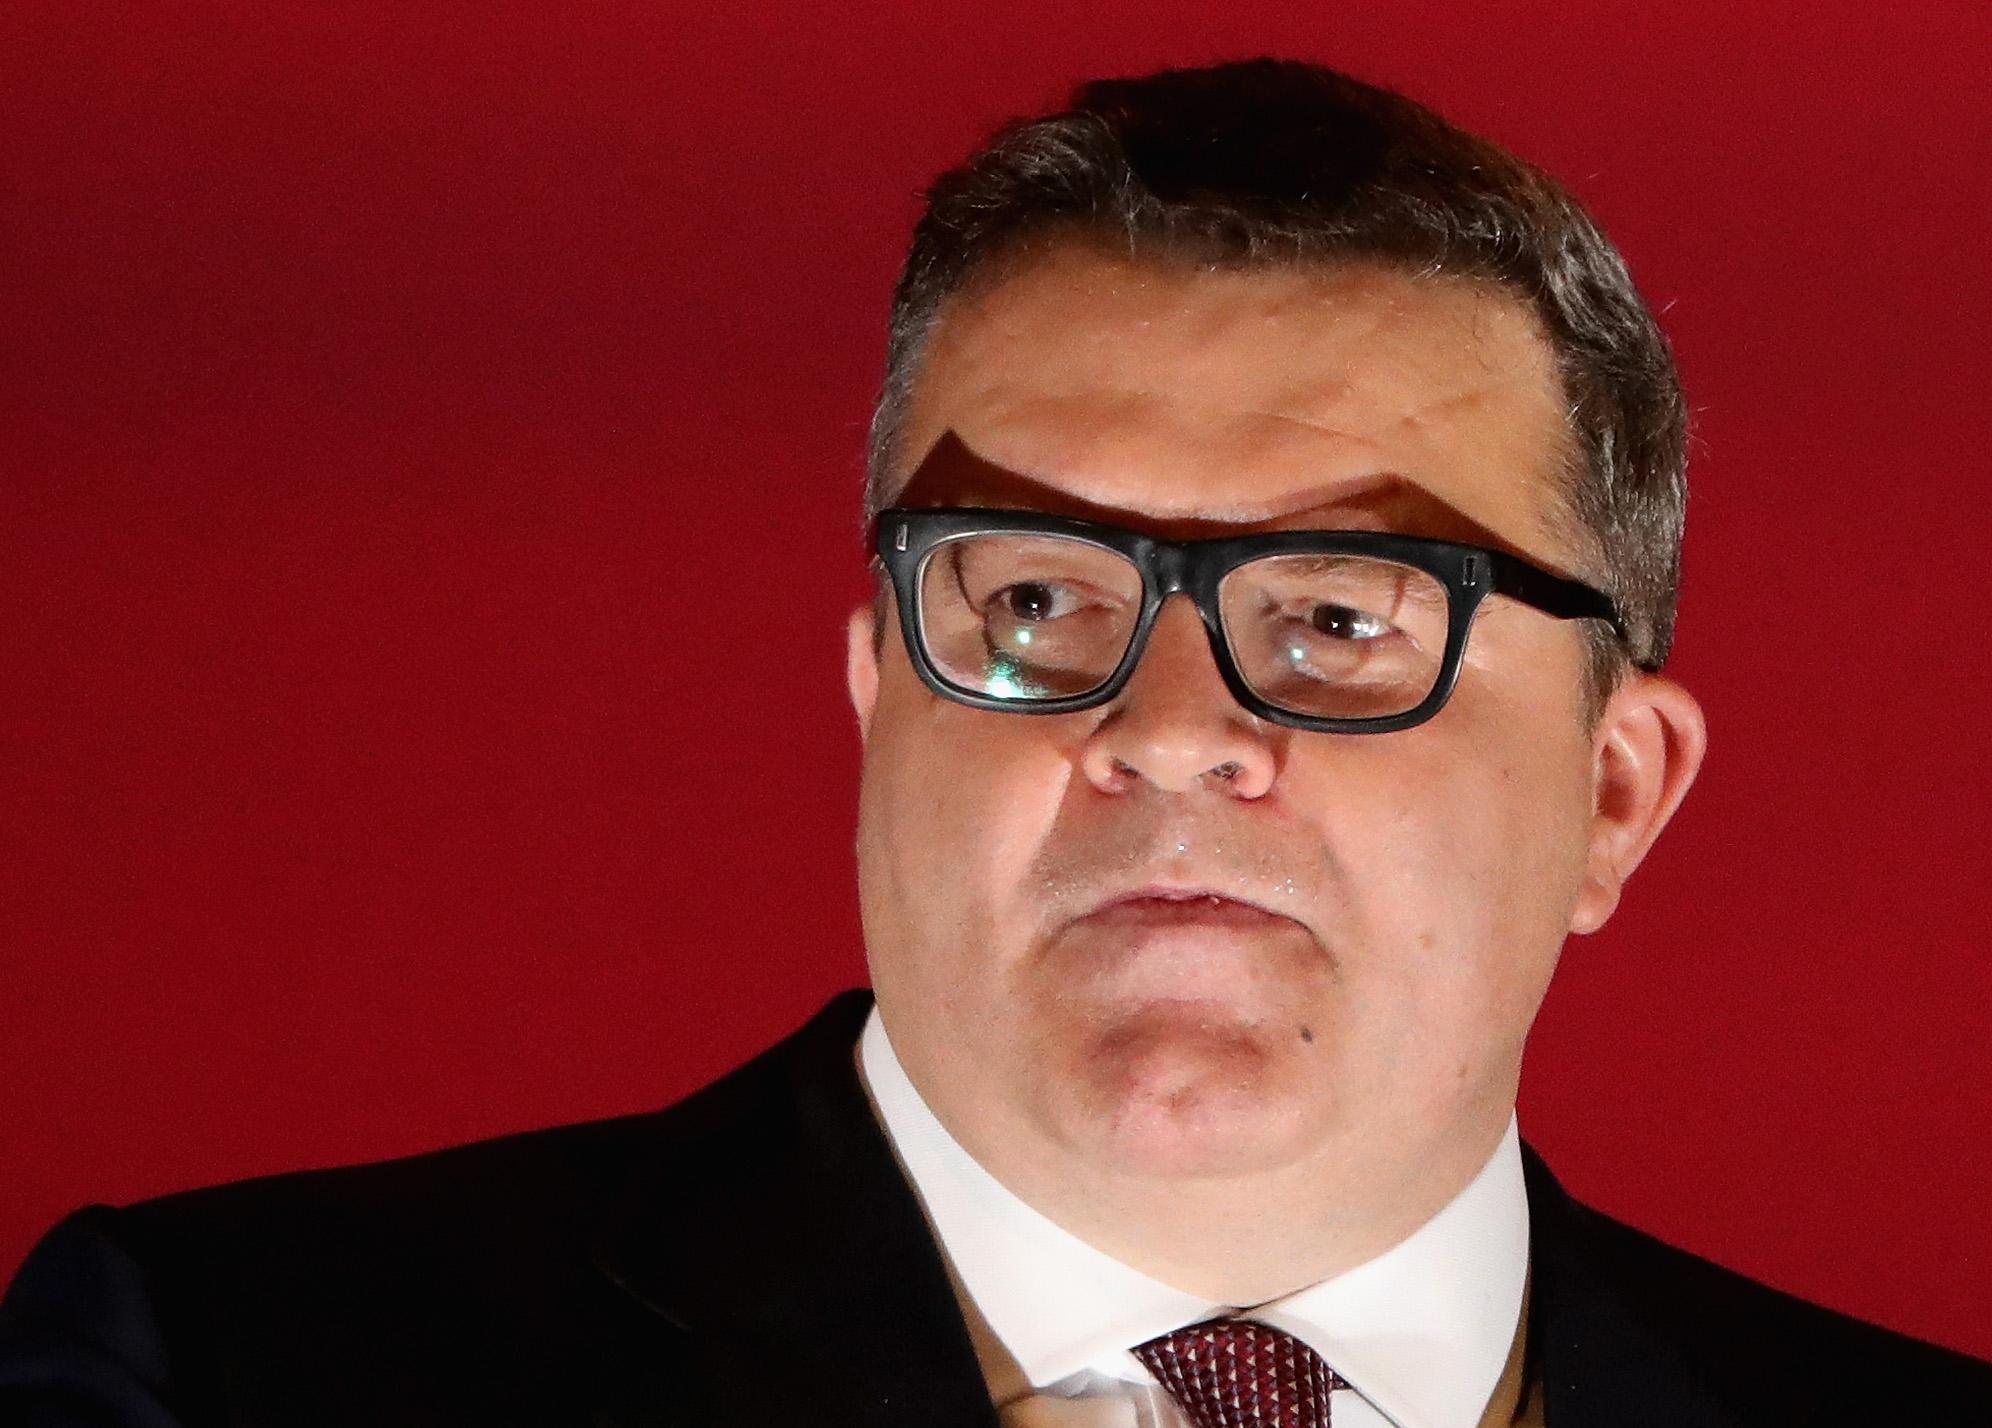 Tom Watson said Corbyn would lead Labour in to the next election and that 'it doesn't matter' if that is 'a good or a bad thing'